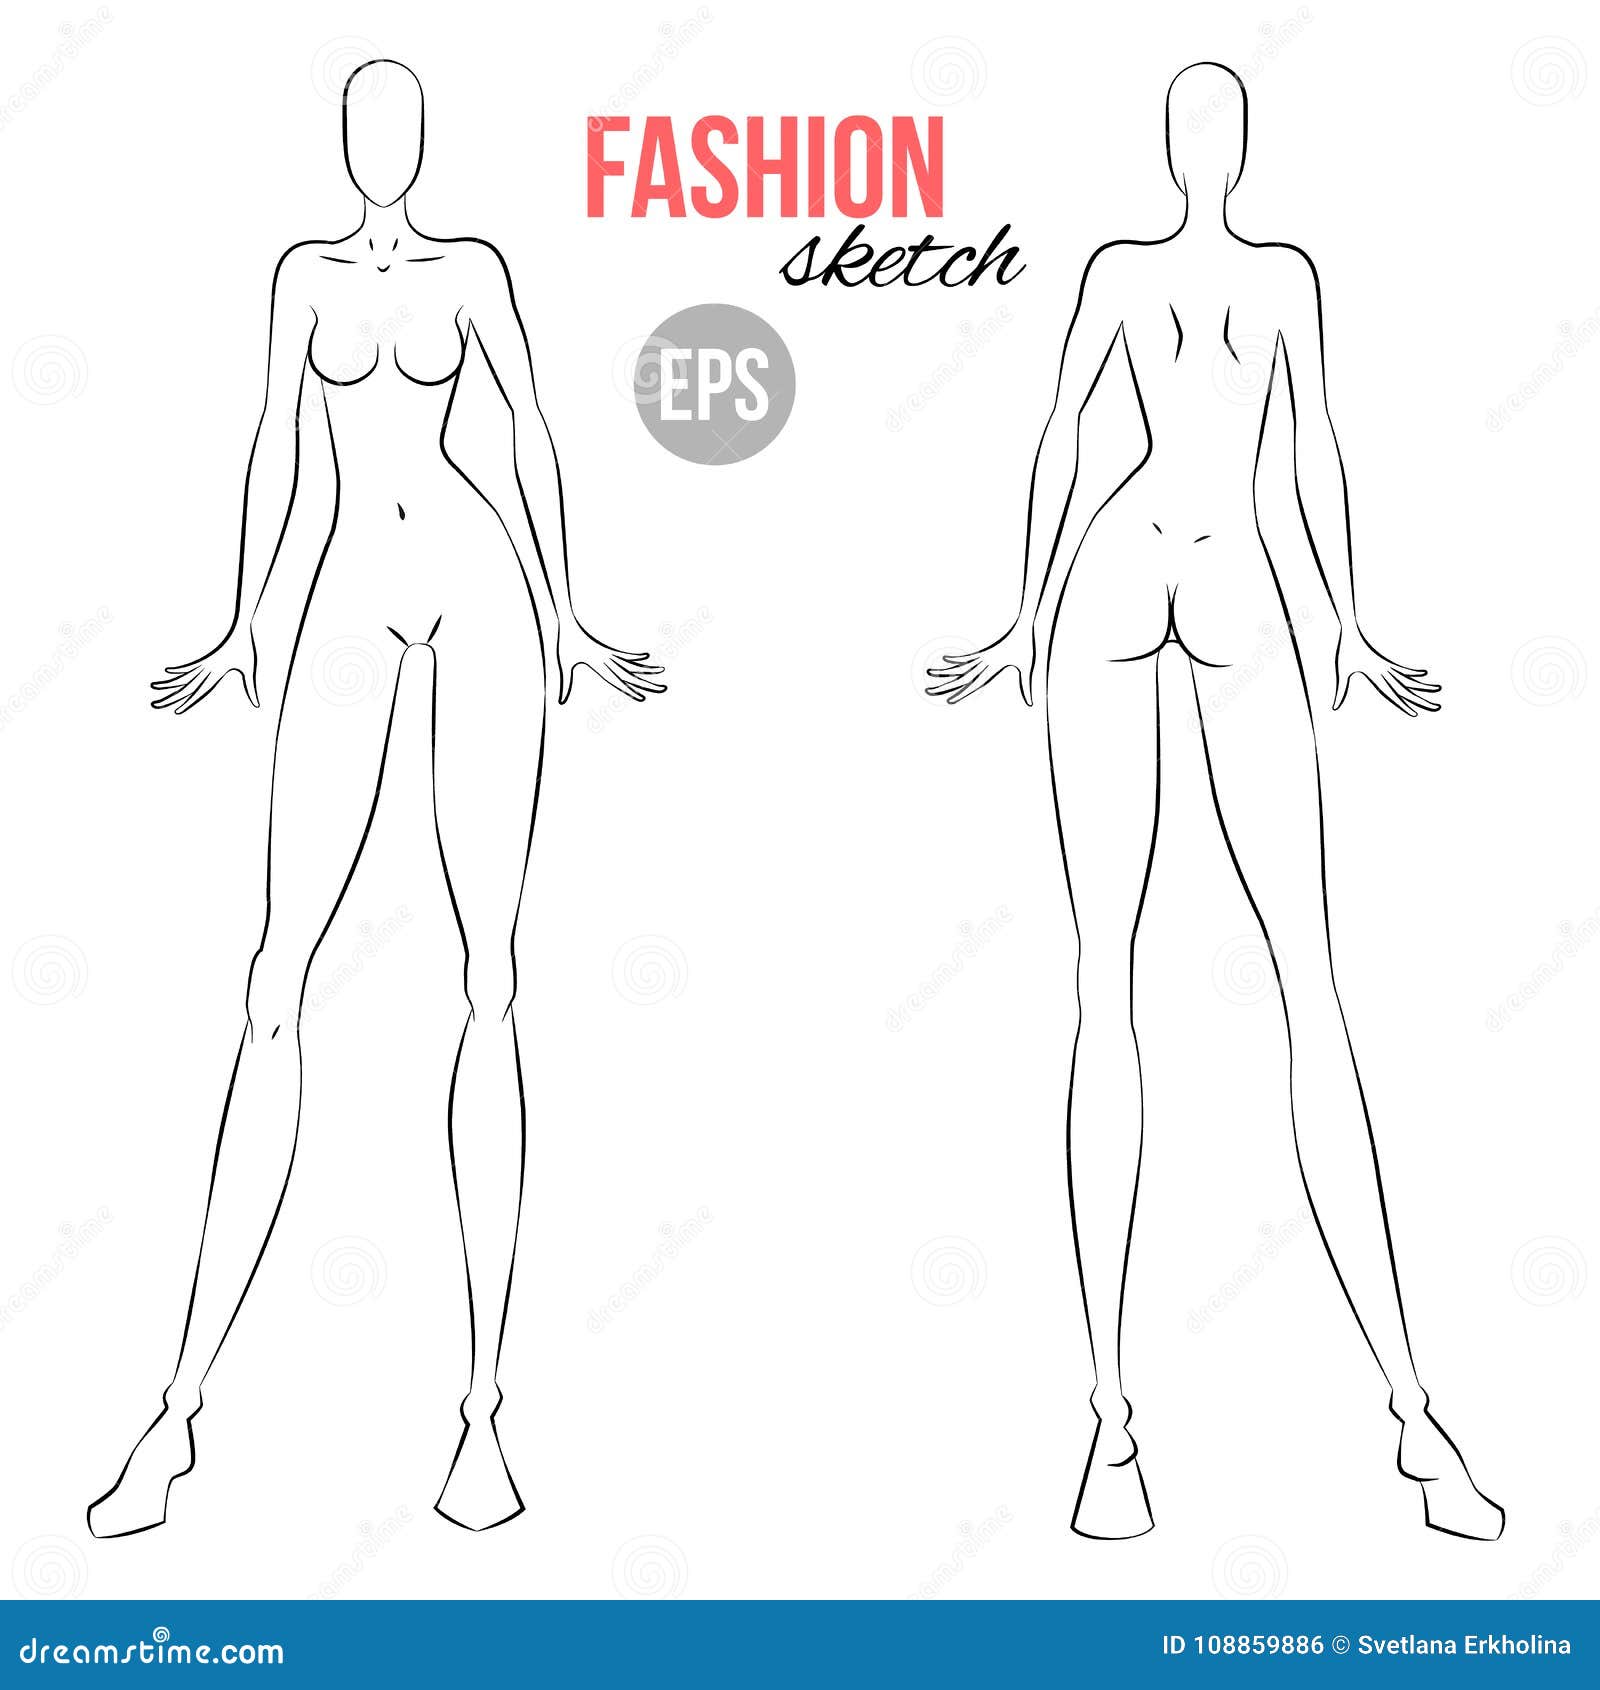 CRISTY  Notebooks  A4 Women Fashion Sketch Book Outline Template Women  Wear Fashion Illustration Templates Front Back Side Figure 50 Sheets Paper  women A4  Buy Online at Best Price in